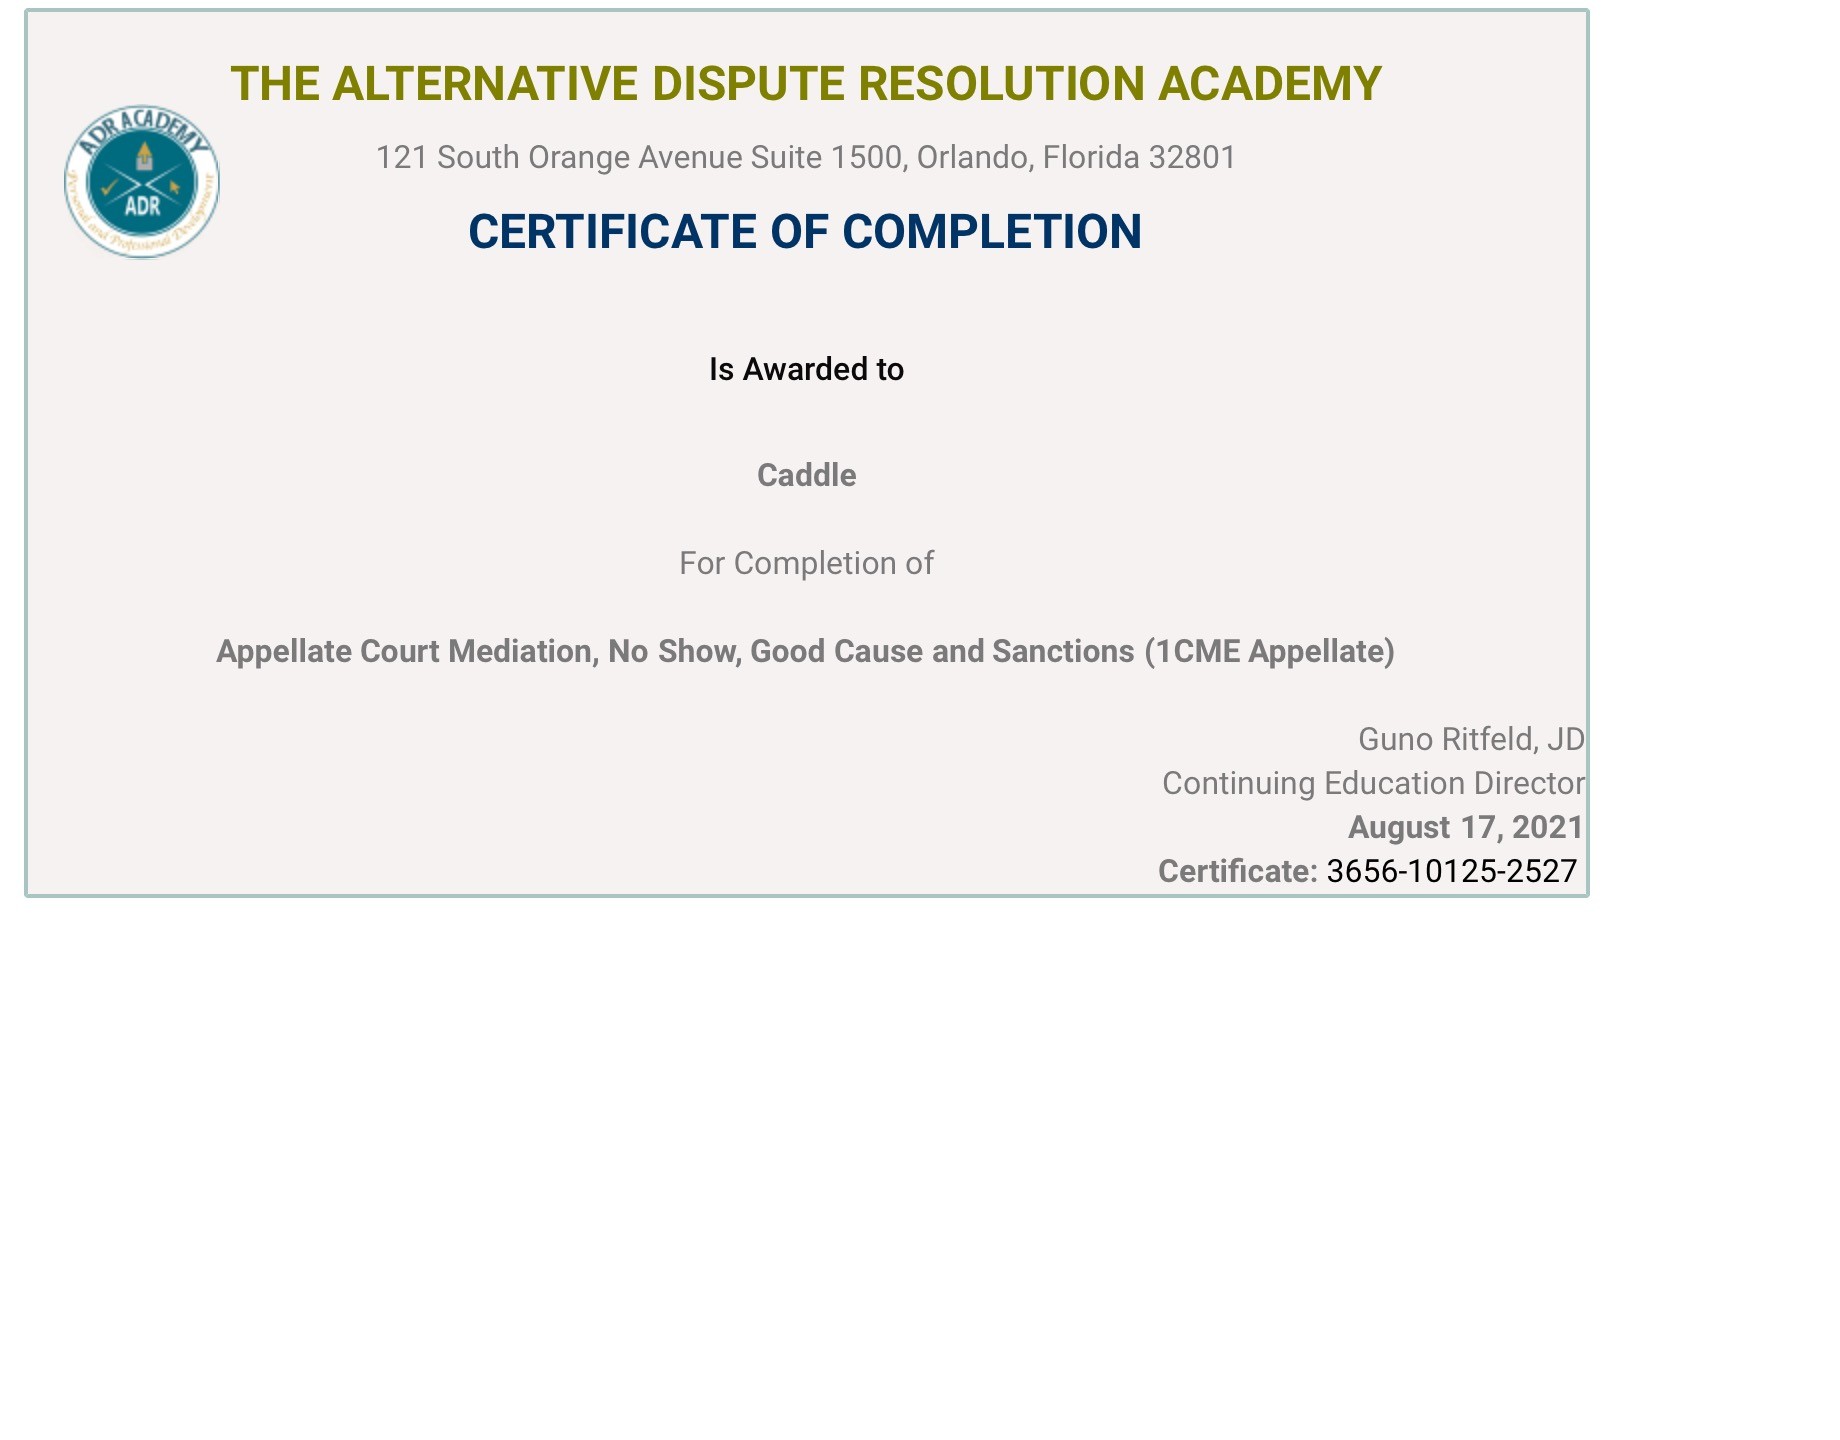 Certificate for User Caddle